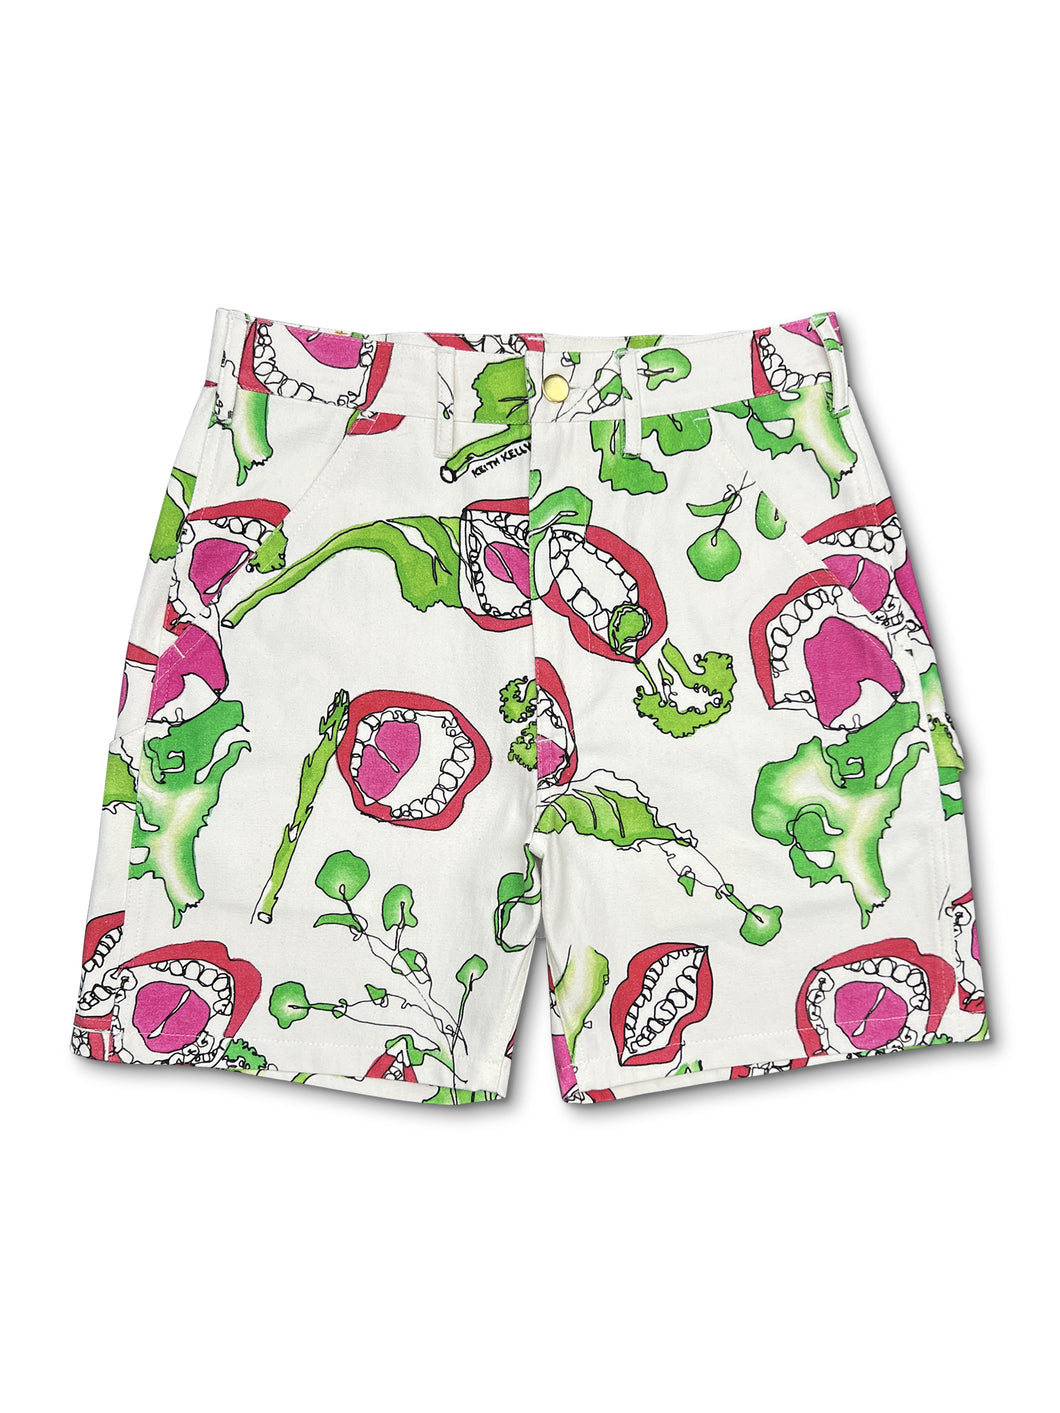 Eat Your Greens Canvas Shorts